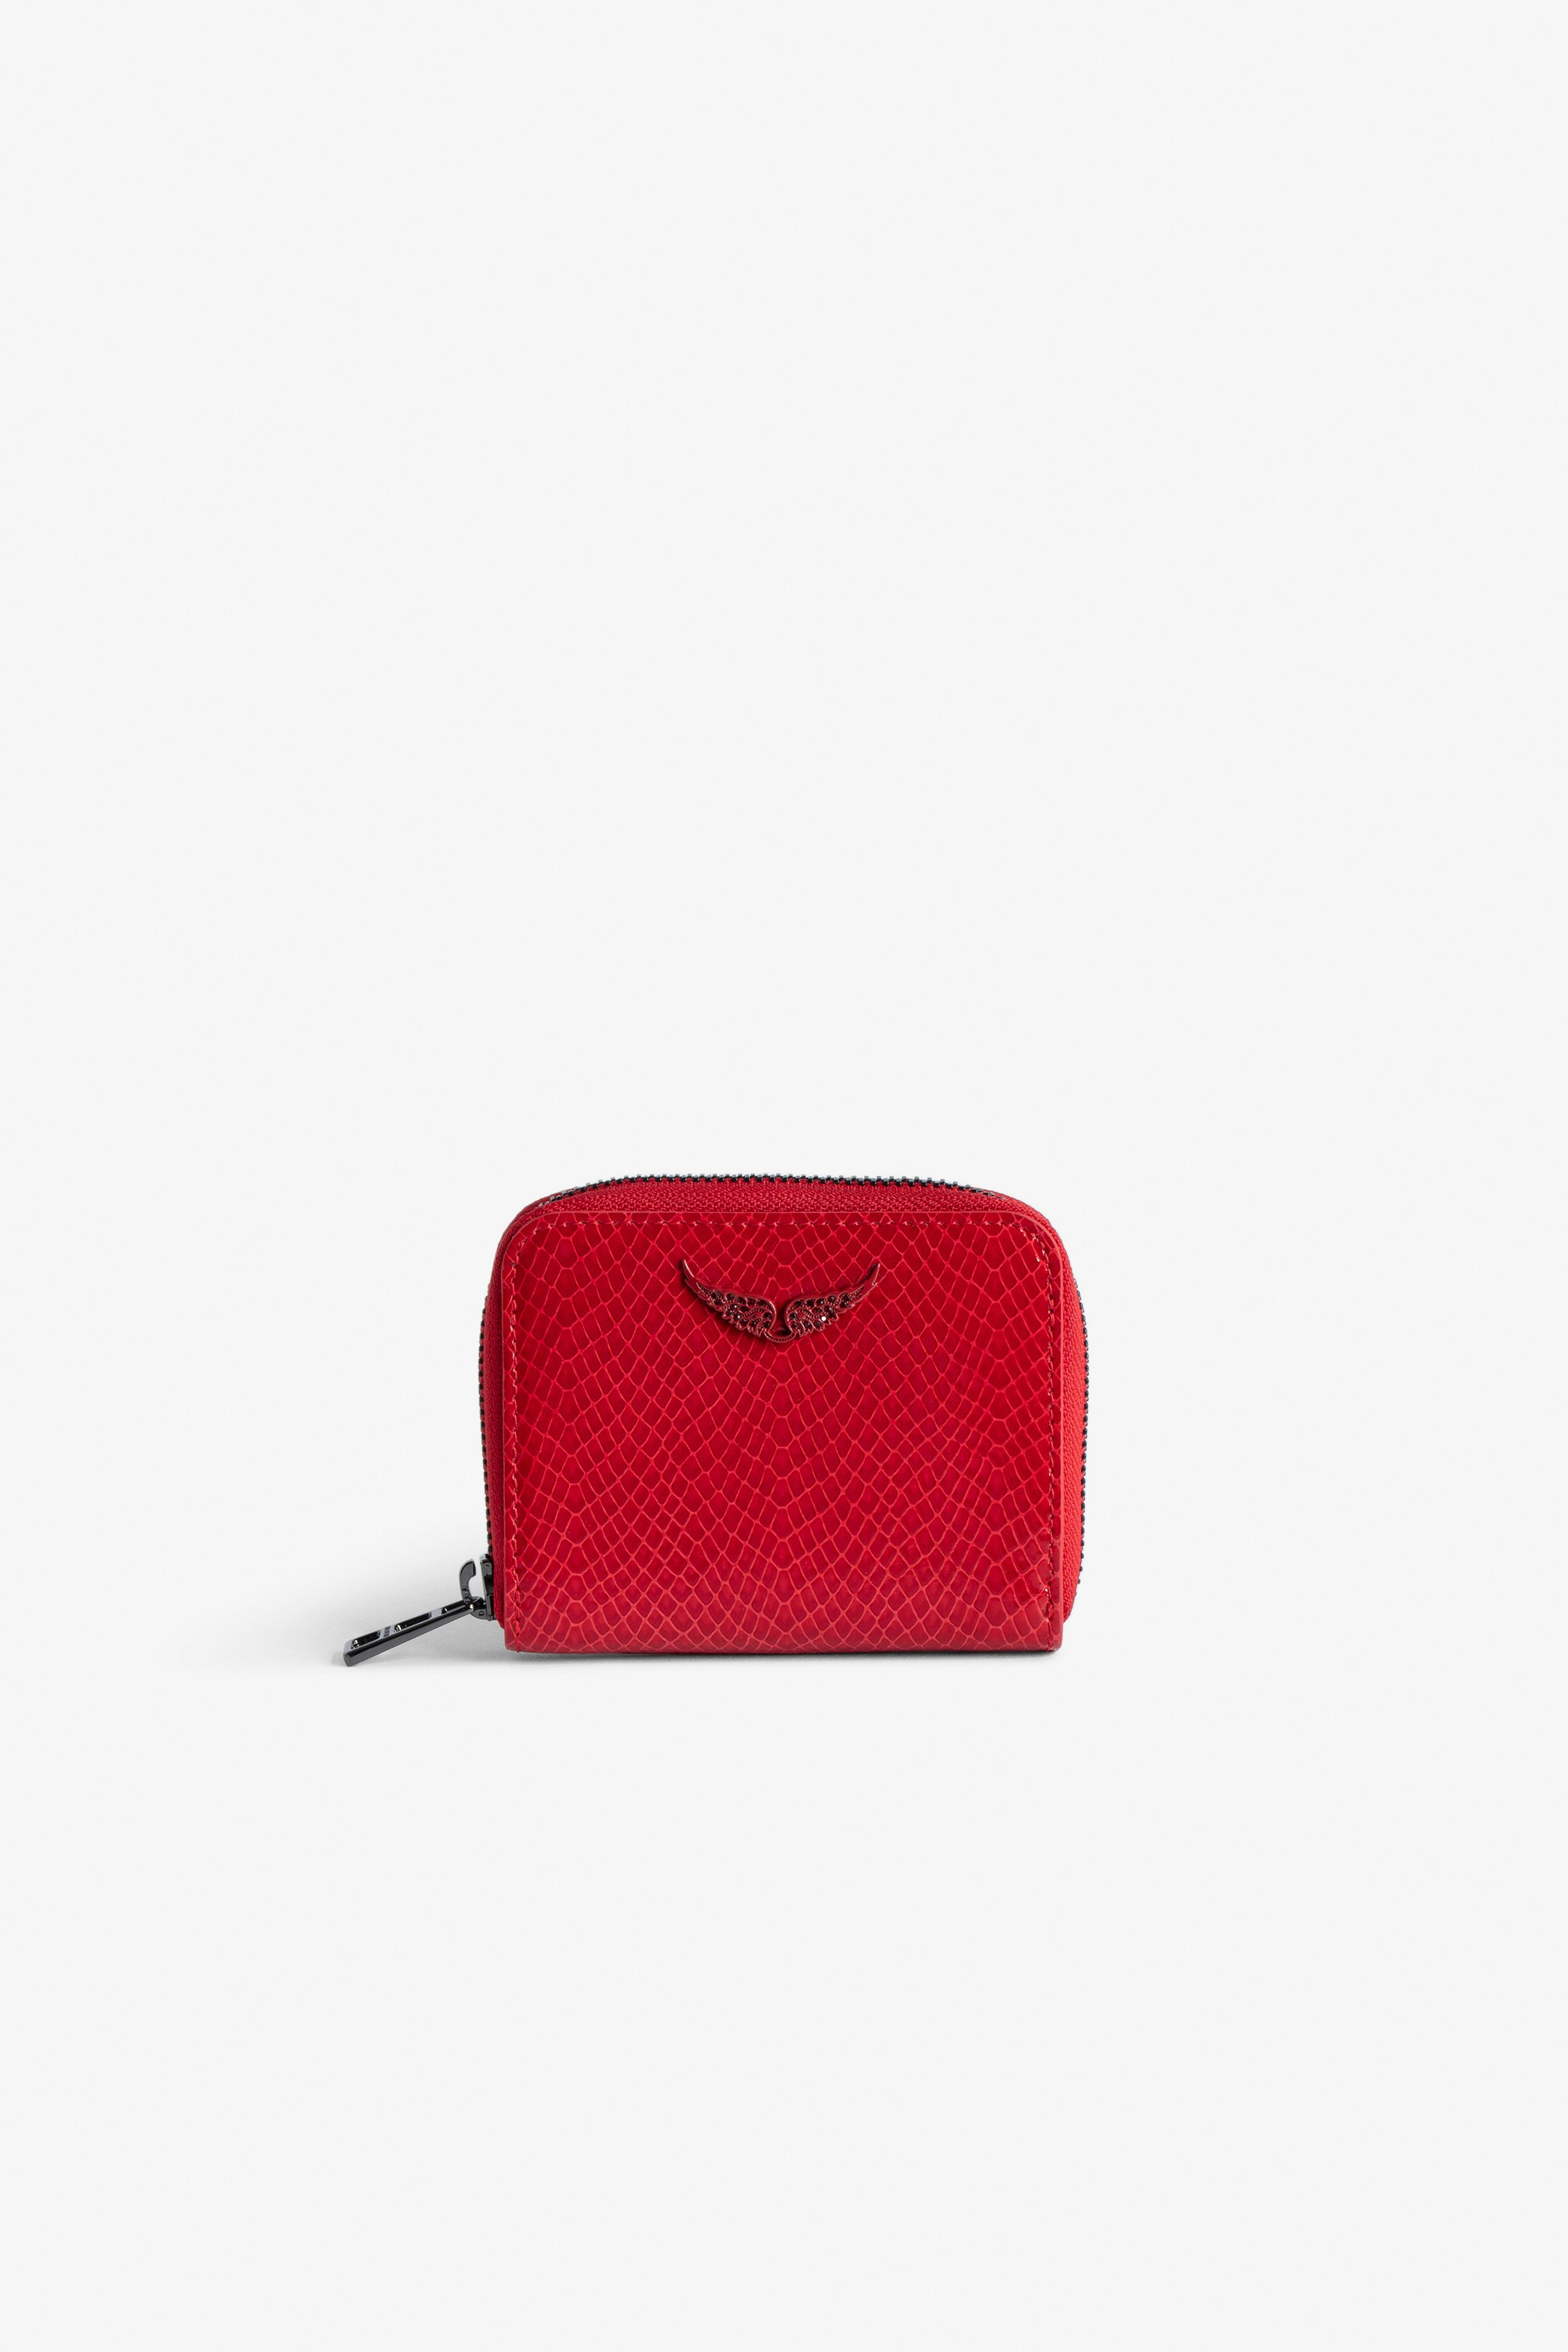 Mini ZV Embossed Coin Purse - Women’s red python-effect patent leather clutch with wings charm.